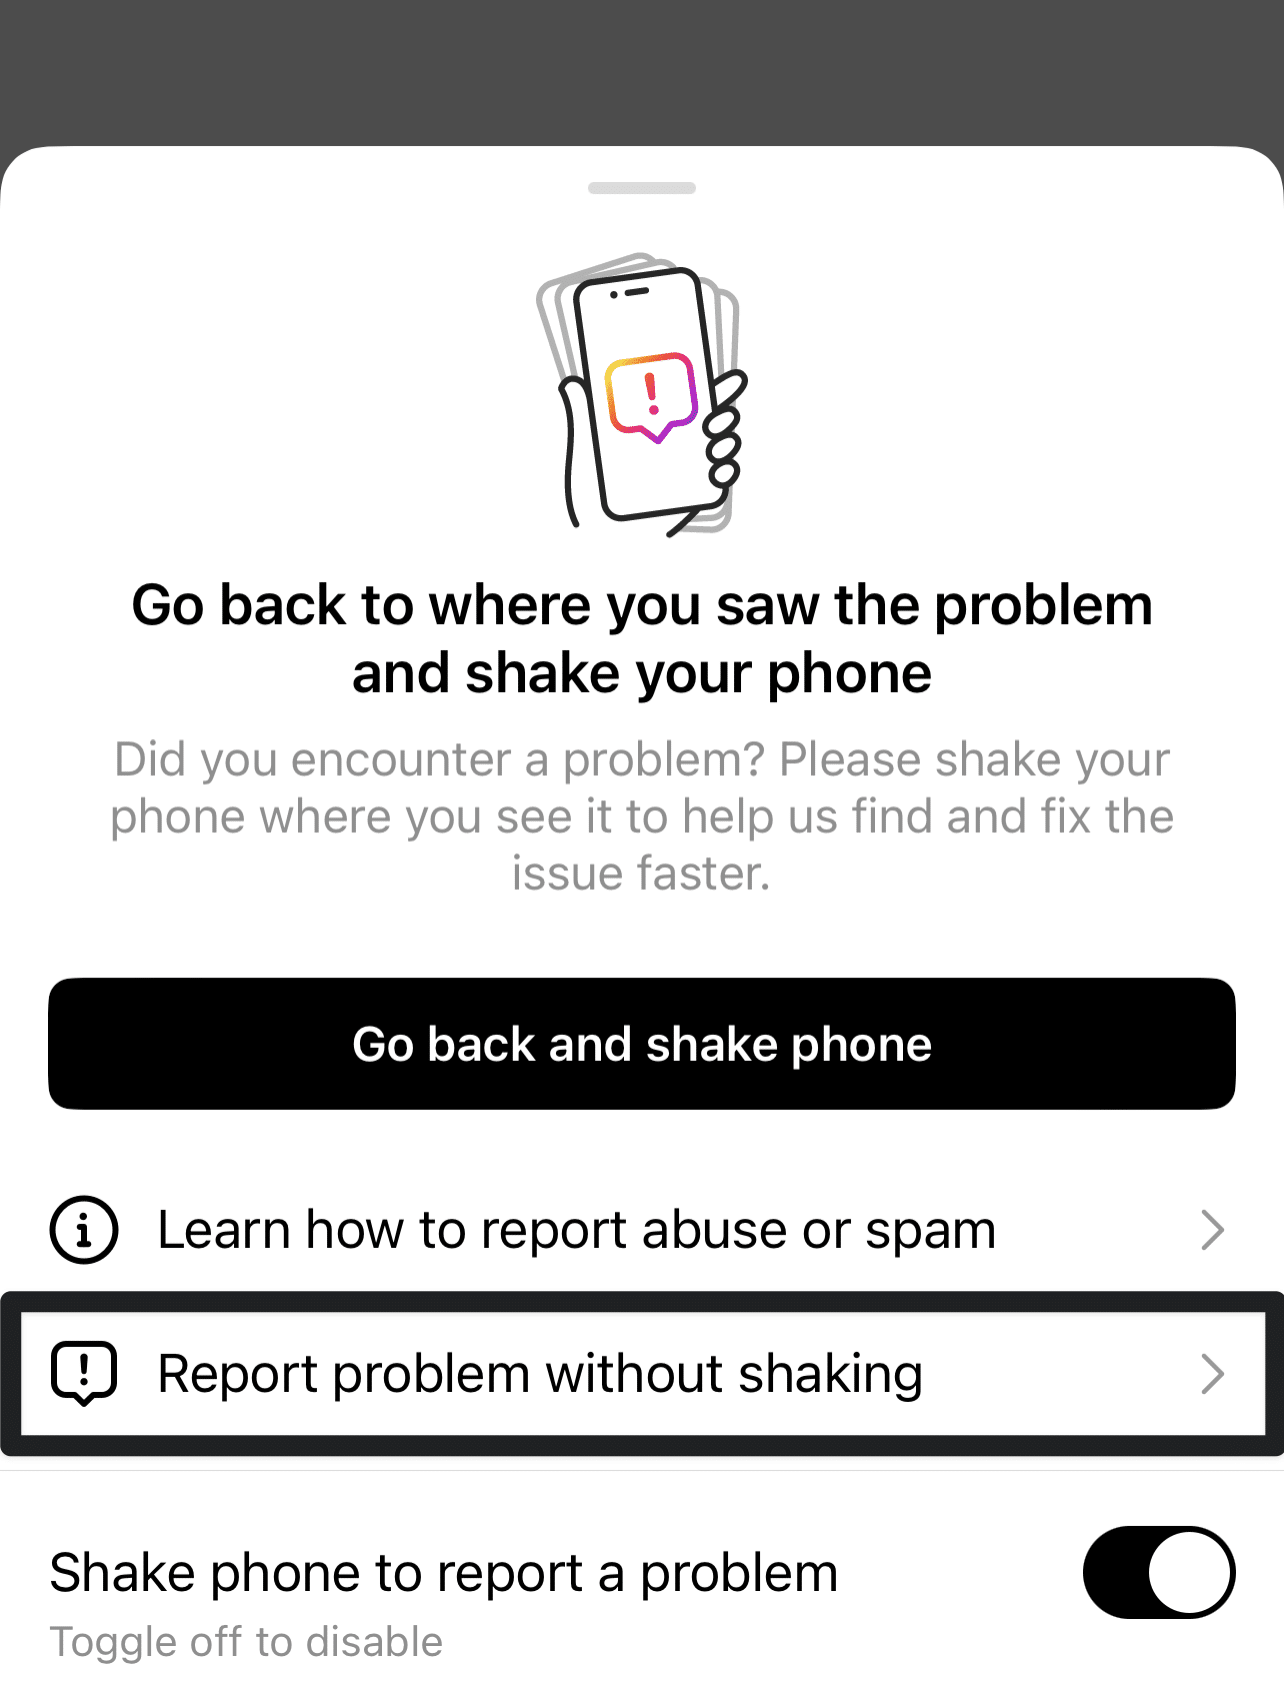 Report the Threads app issue to the support team through the Threads app settings to fix Instagram Threads not uploading, posting, creating new threads or 'your thread/post failed to upload' error